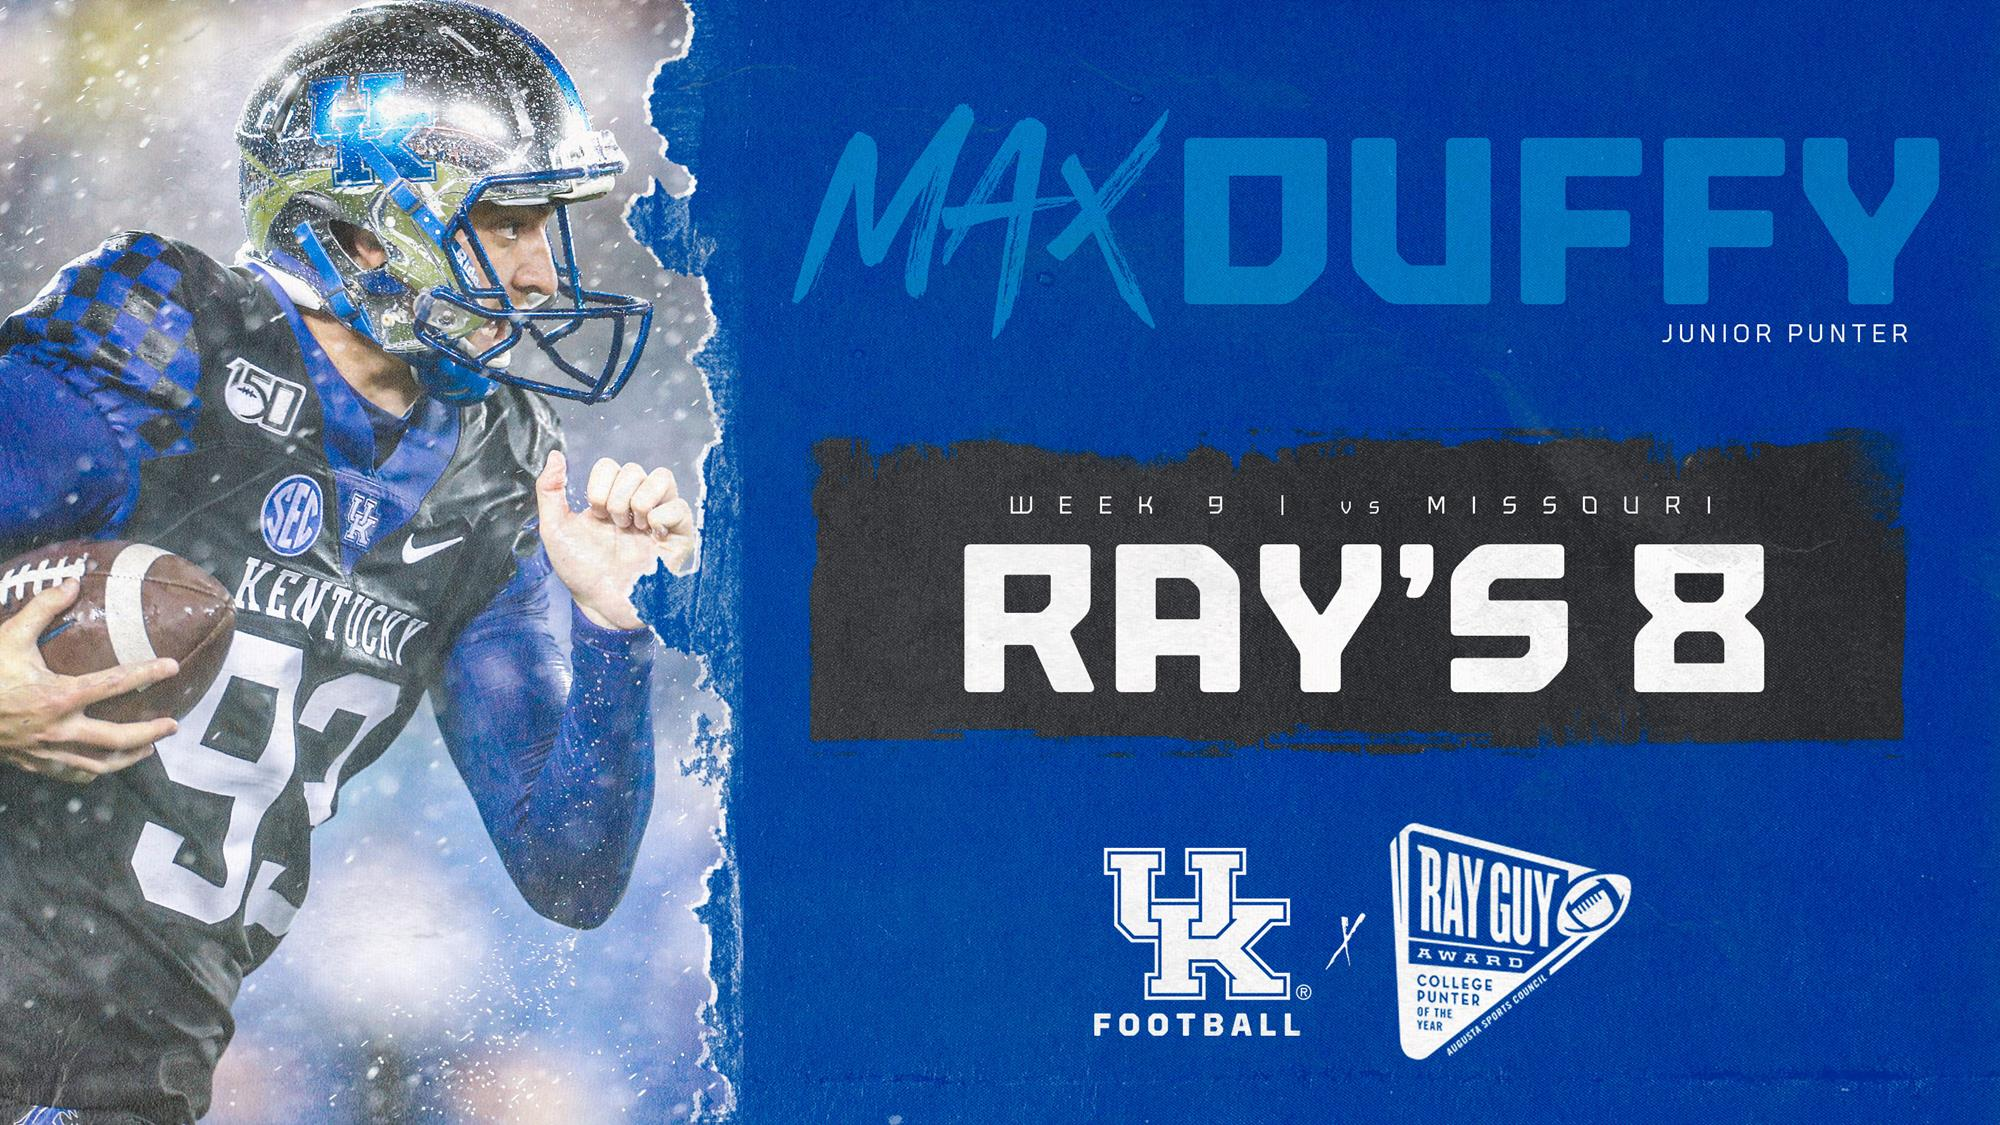 Max Duffy Named to Ray’s 8 for Third Time